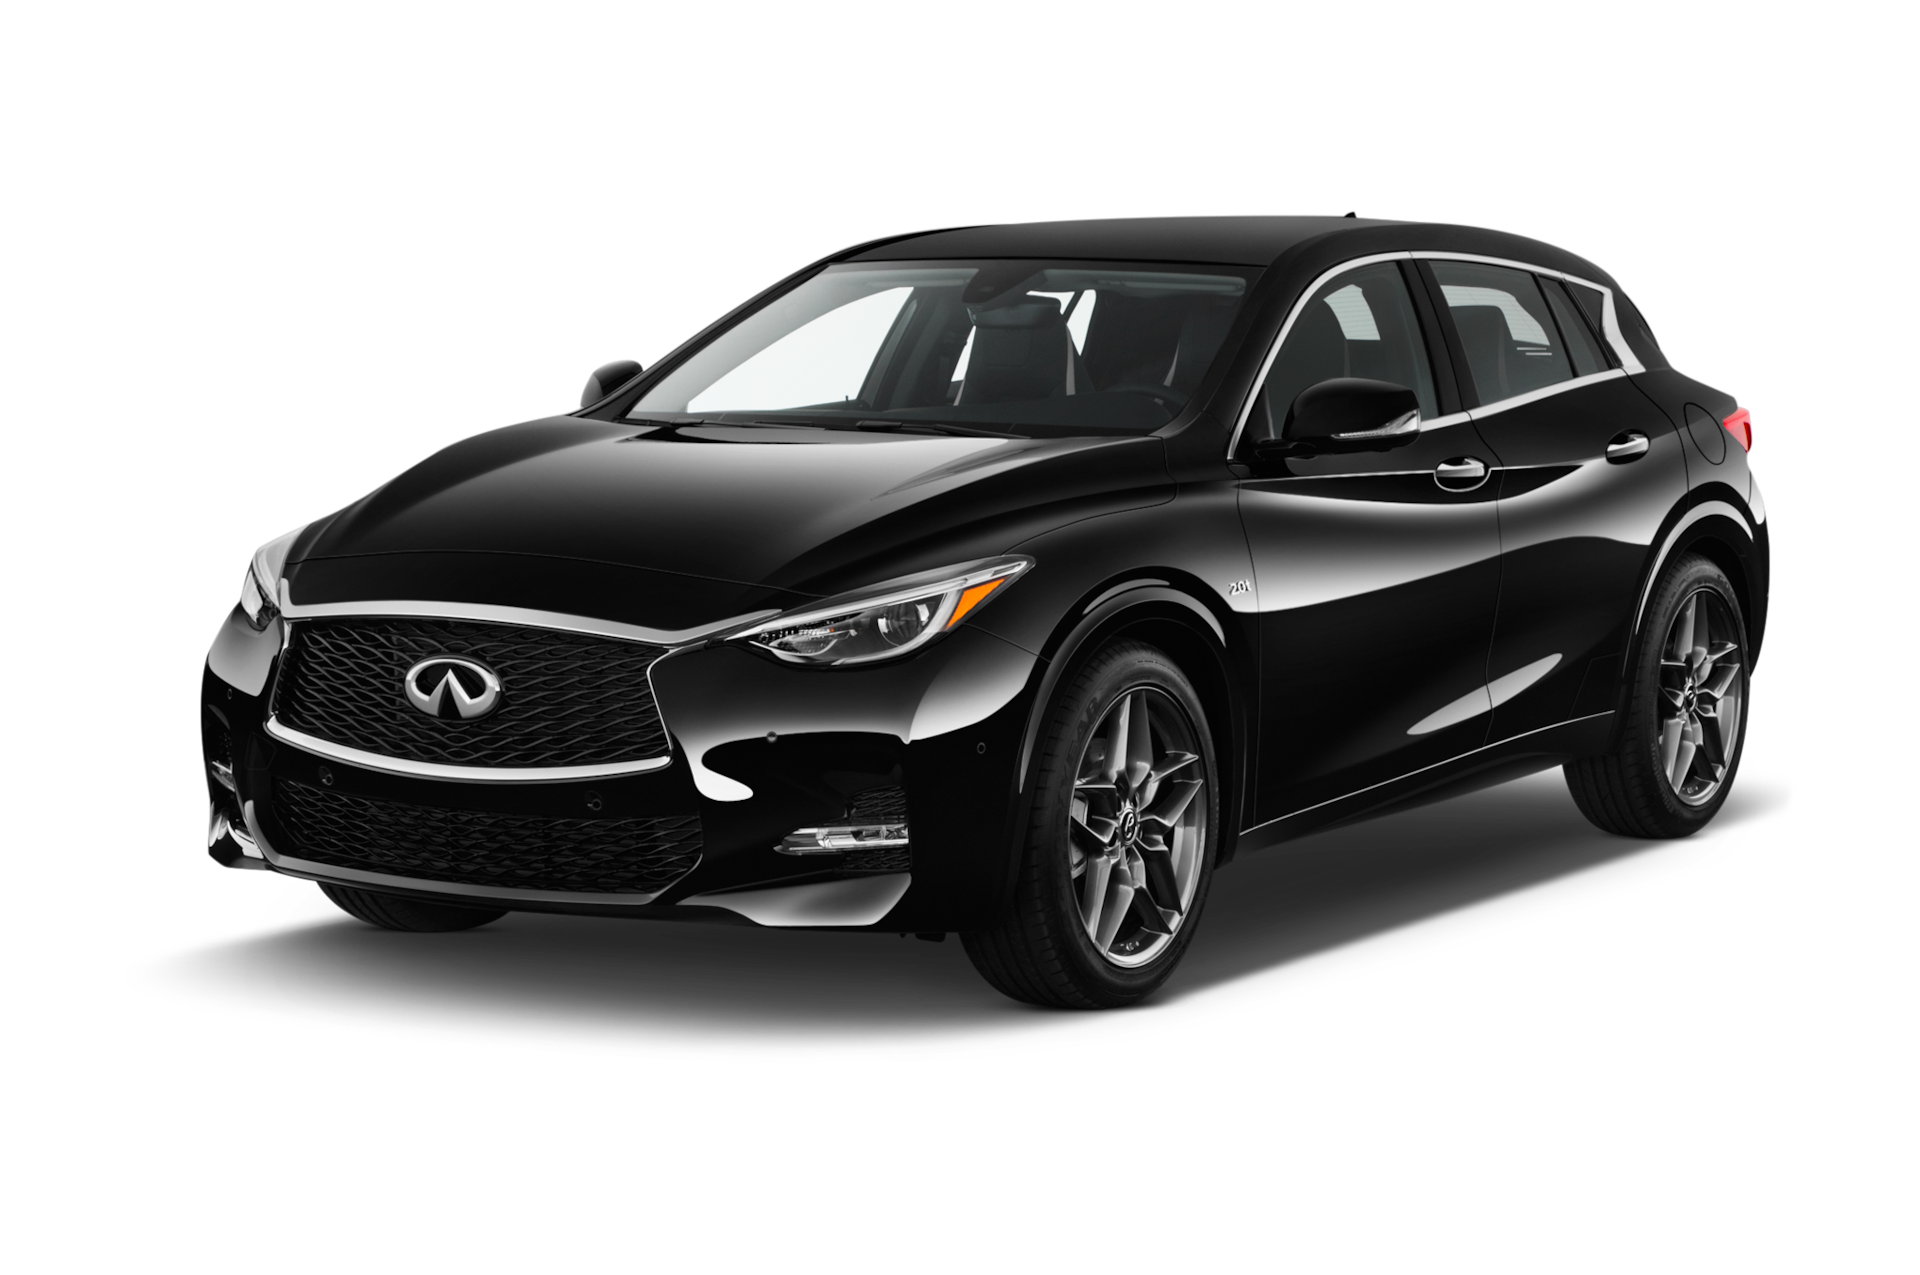 2019 Infiniti QX30 Prices, Reviews, and Photos - MotorTrend